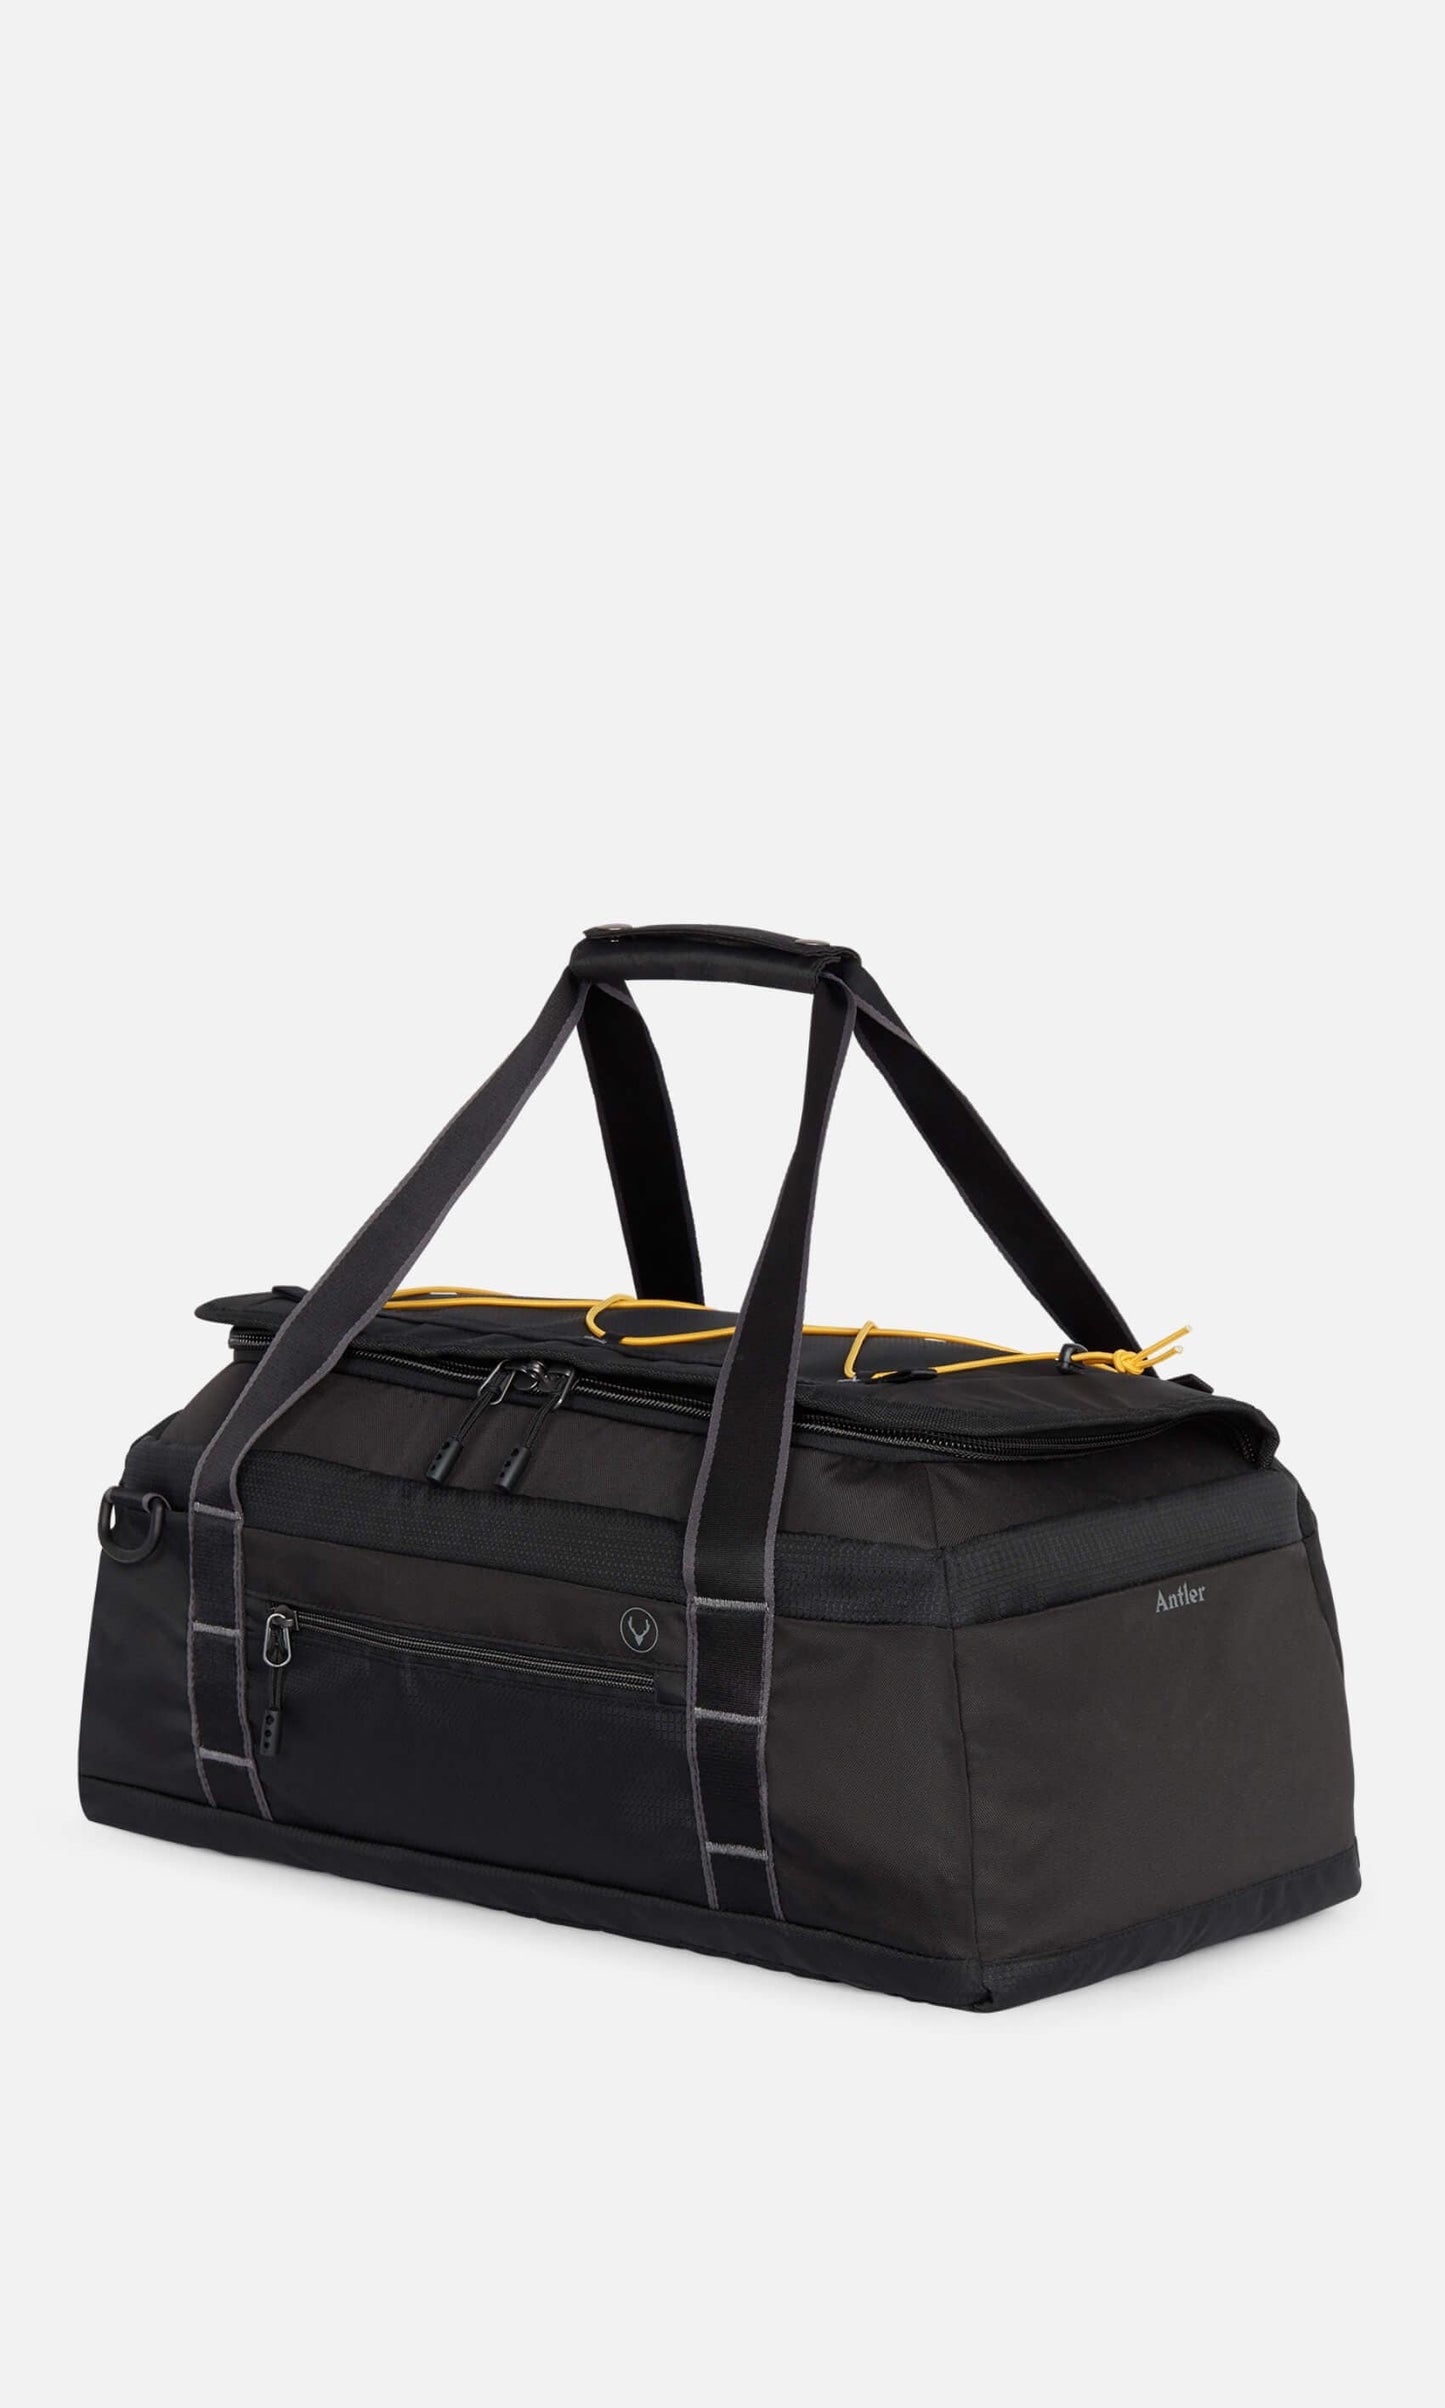 Bamburgh Carry-On Duffel in Black